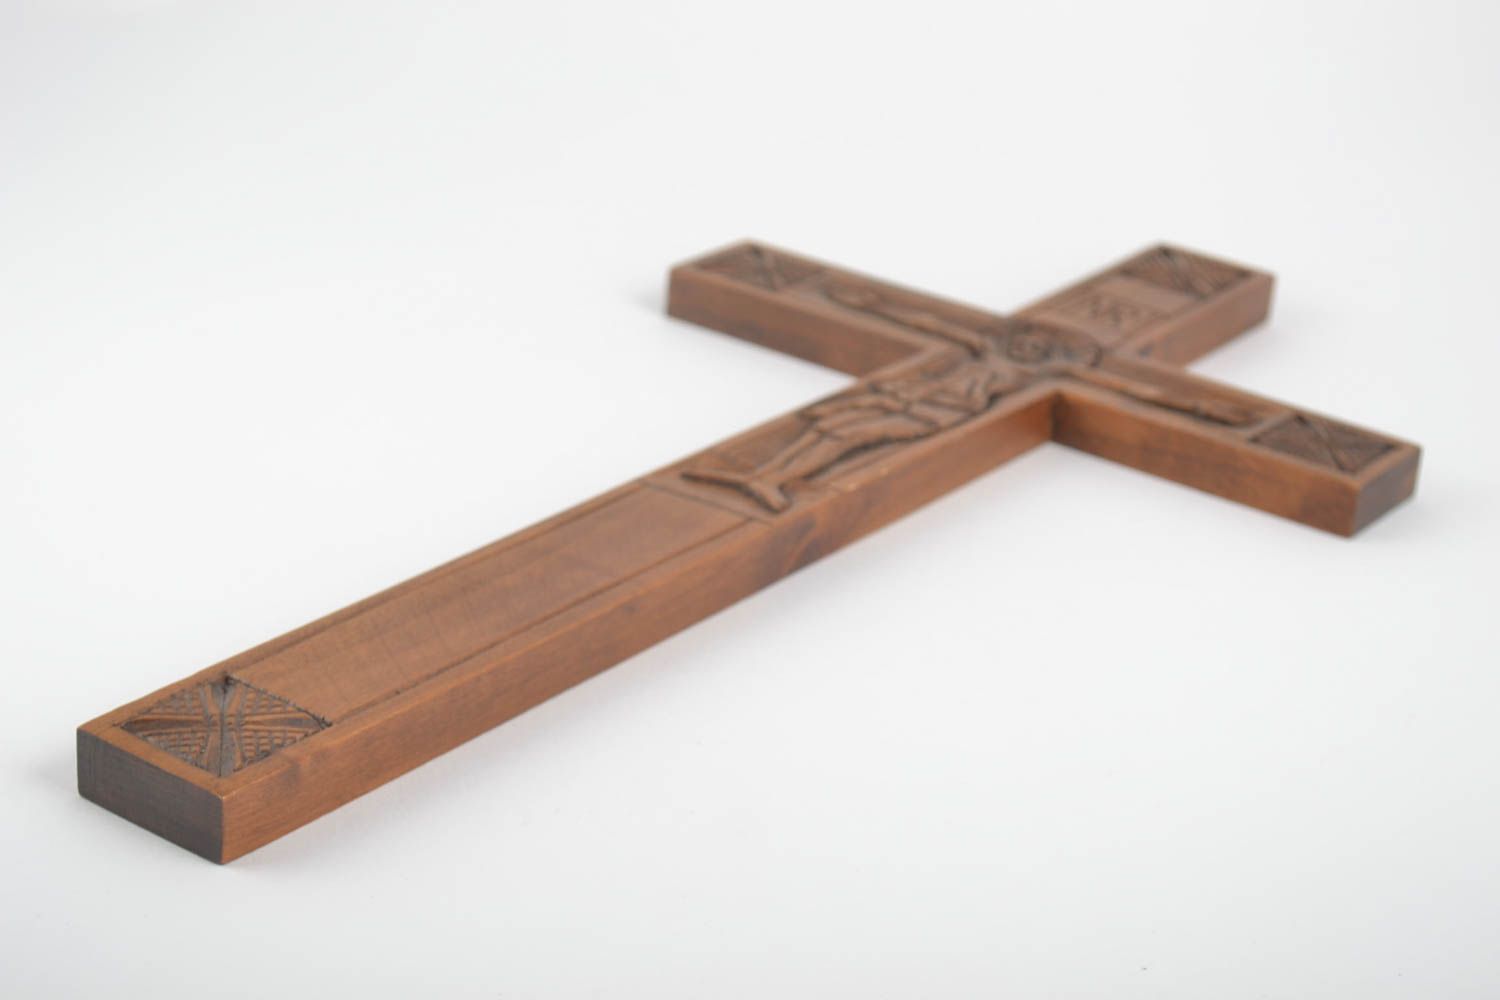 Wall crucifix homemade decorations wooden gifts inspirational gifts wall hanging photo 3